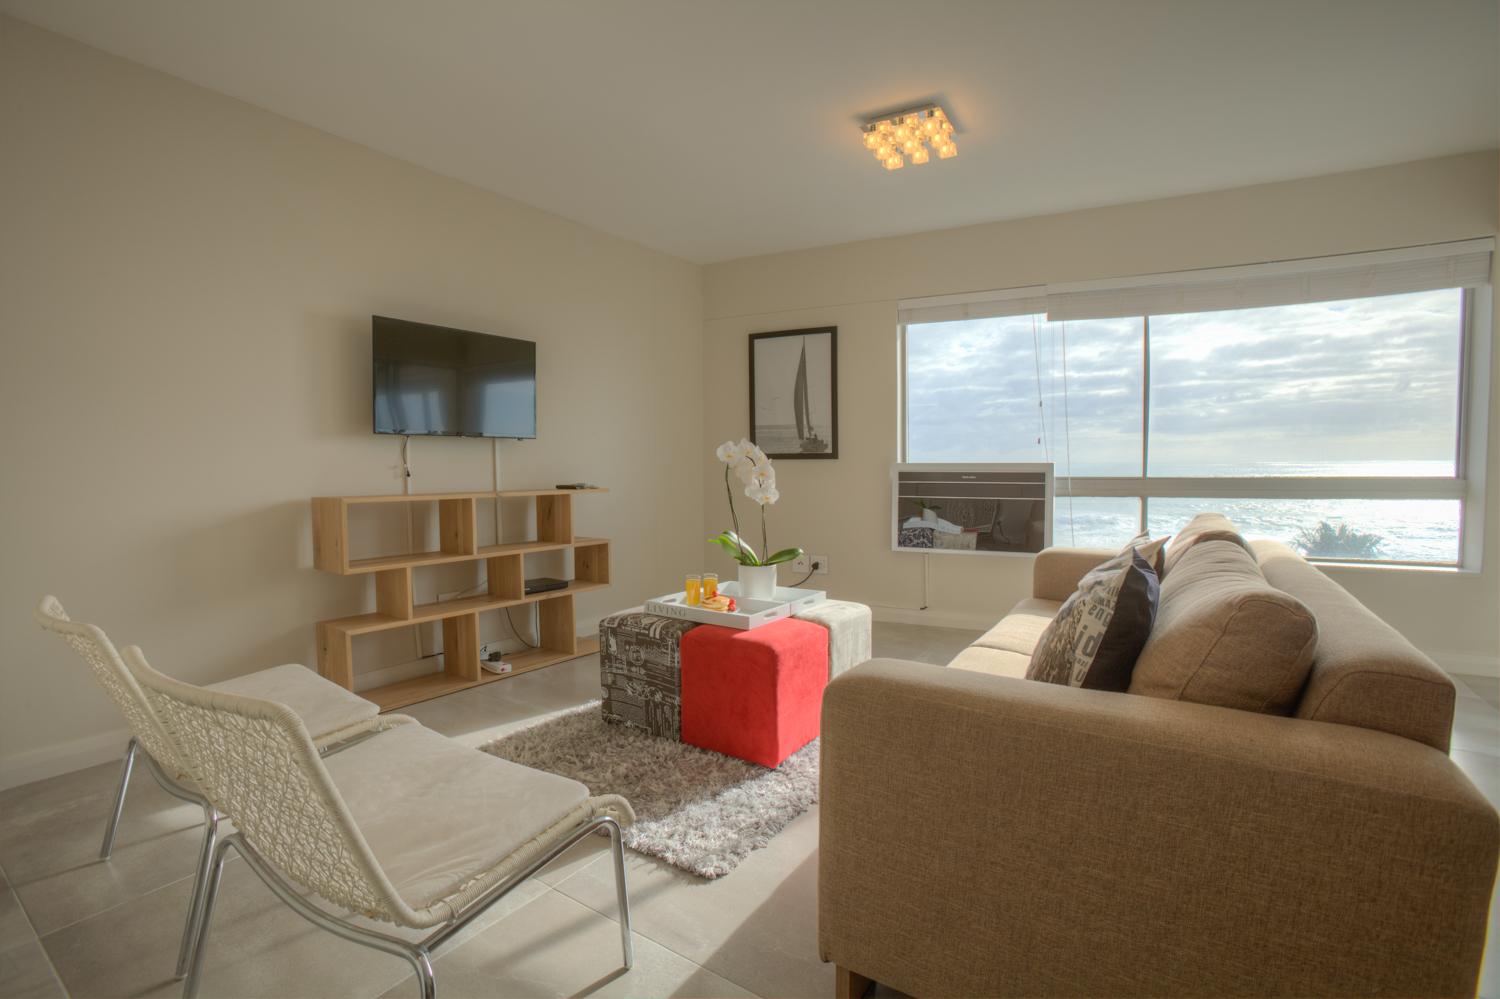 Photo 2 of Vue Duvant Apartment accommodation in Sea Point, Cape Town with 2 bedrooms and 2 bathrooms